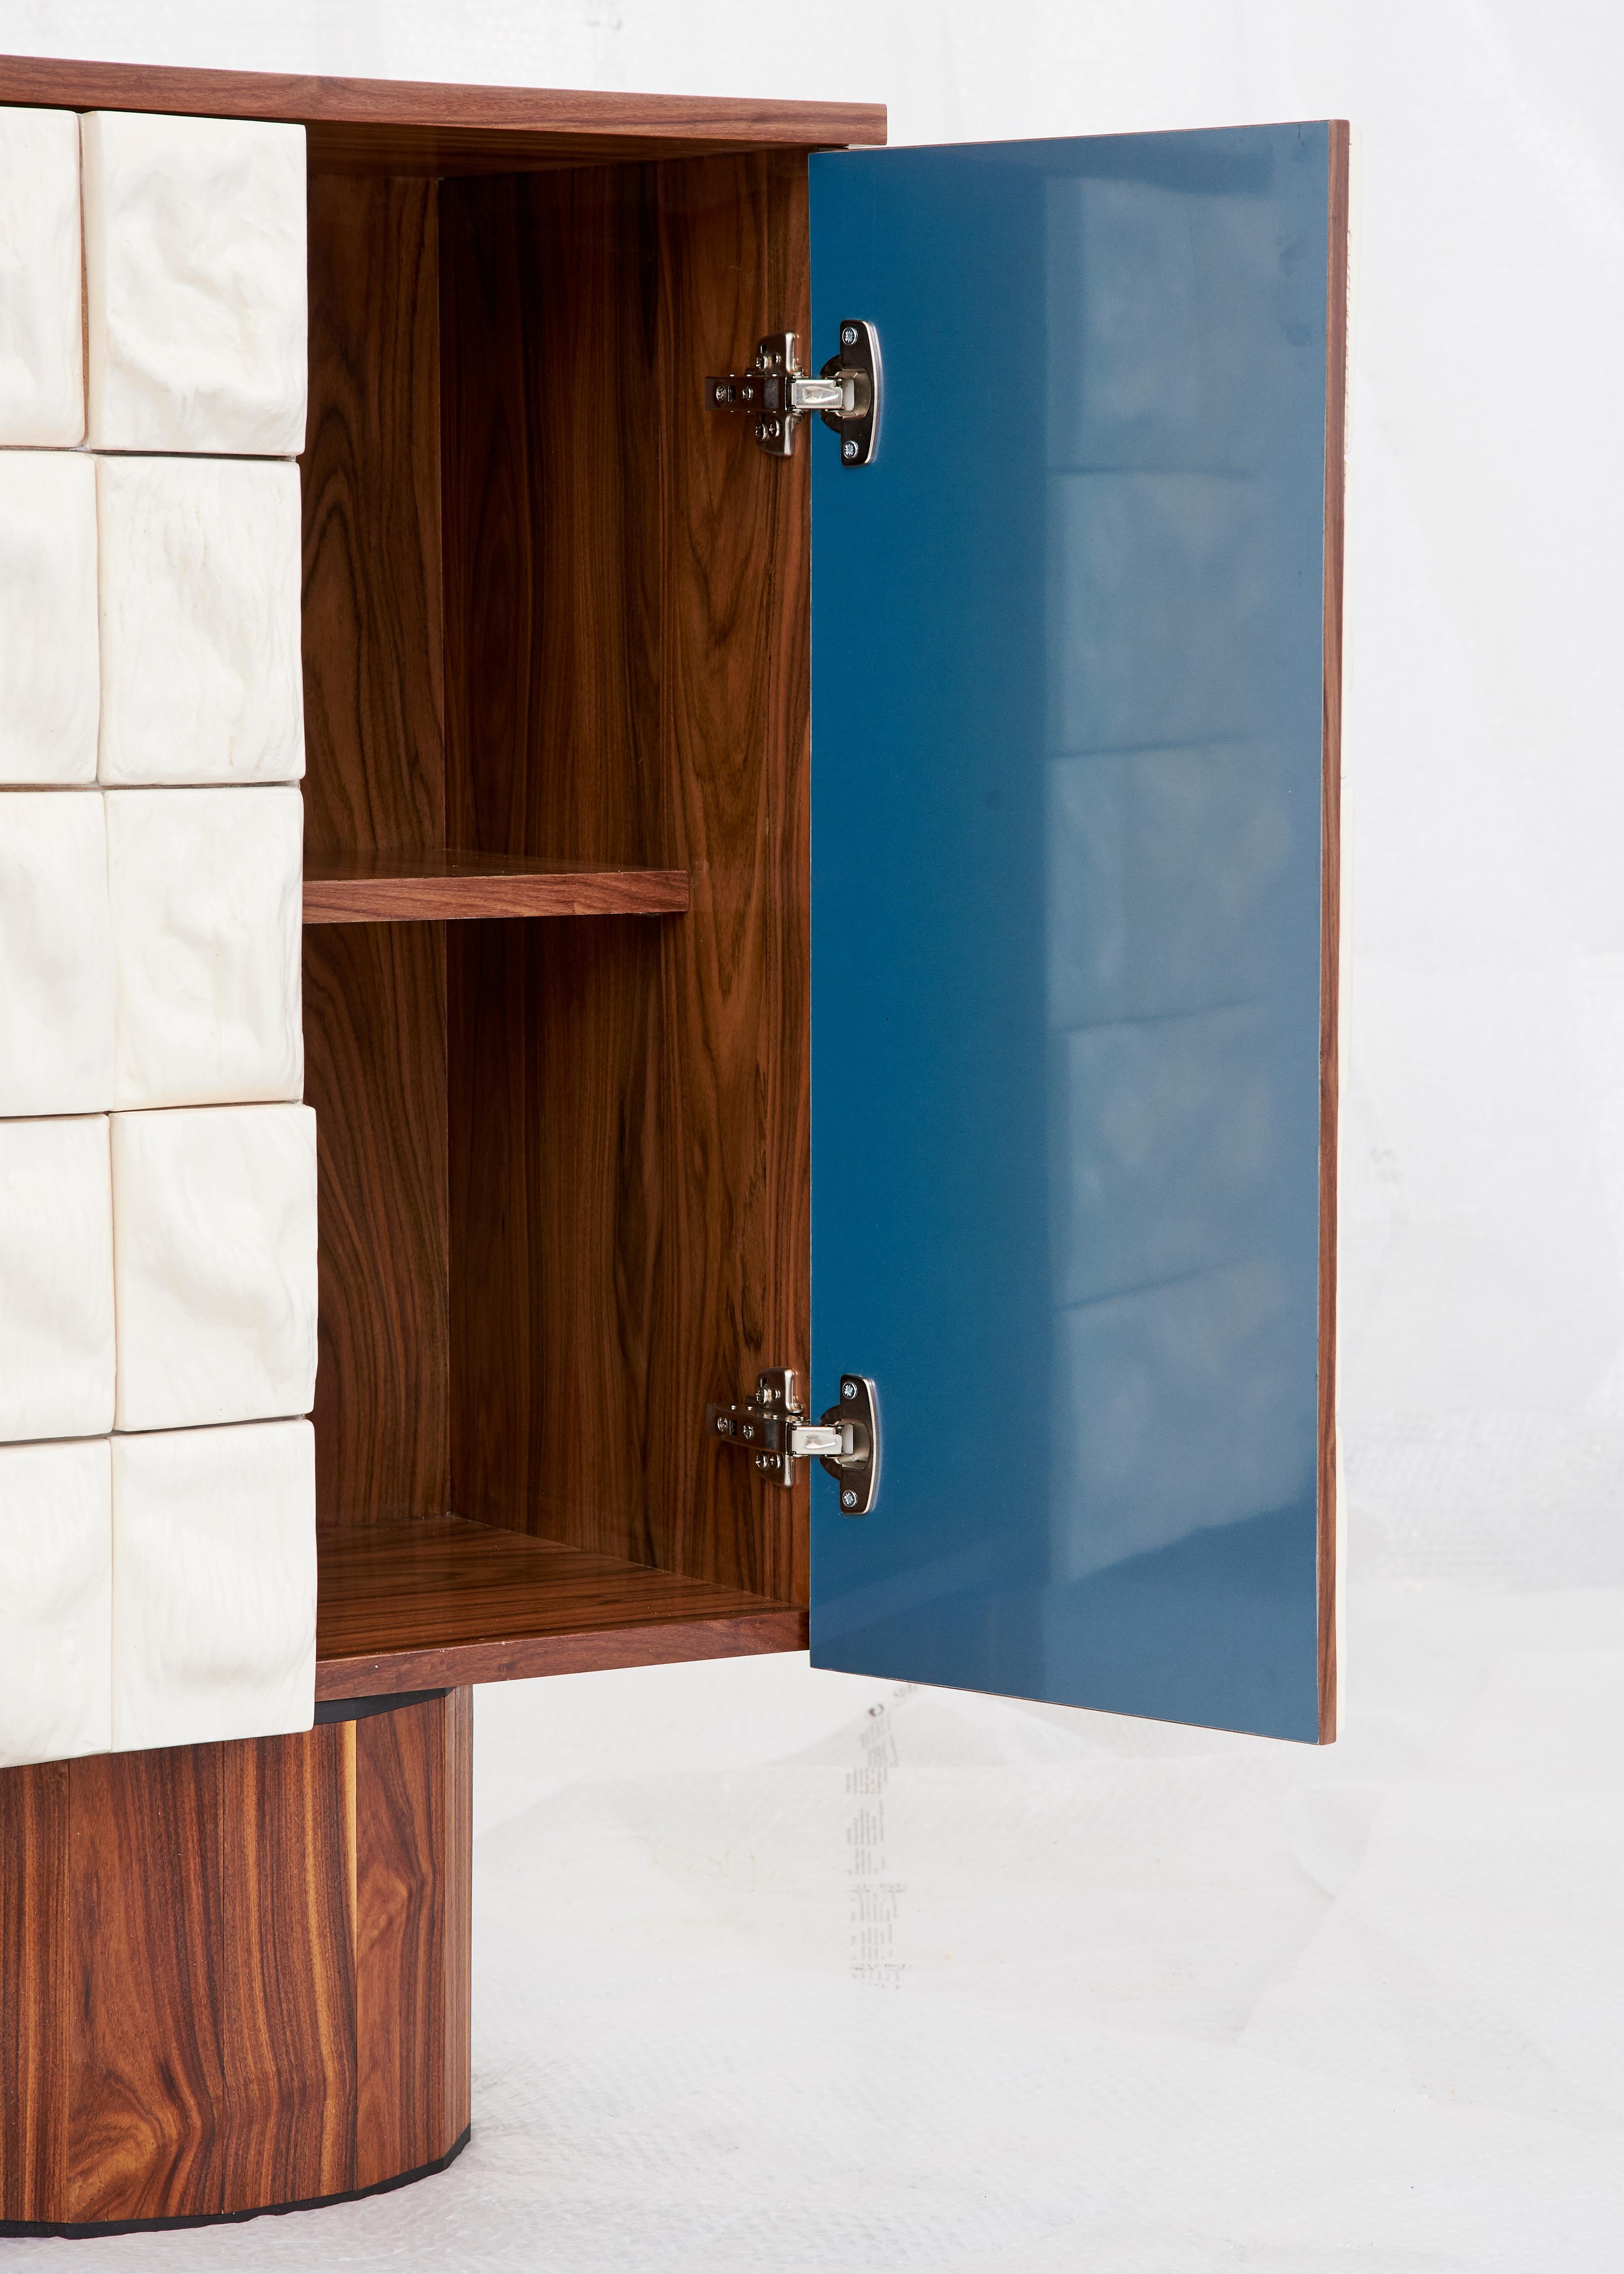 Palissandro cabinet is presented by CAMP

Rem Atelier cabinet is the perfect combination of the linear palissandro wood structure and the organic clay tiles that enrich the doors surfaces.